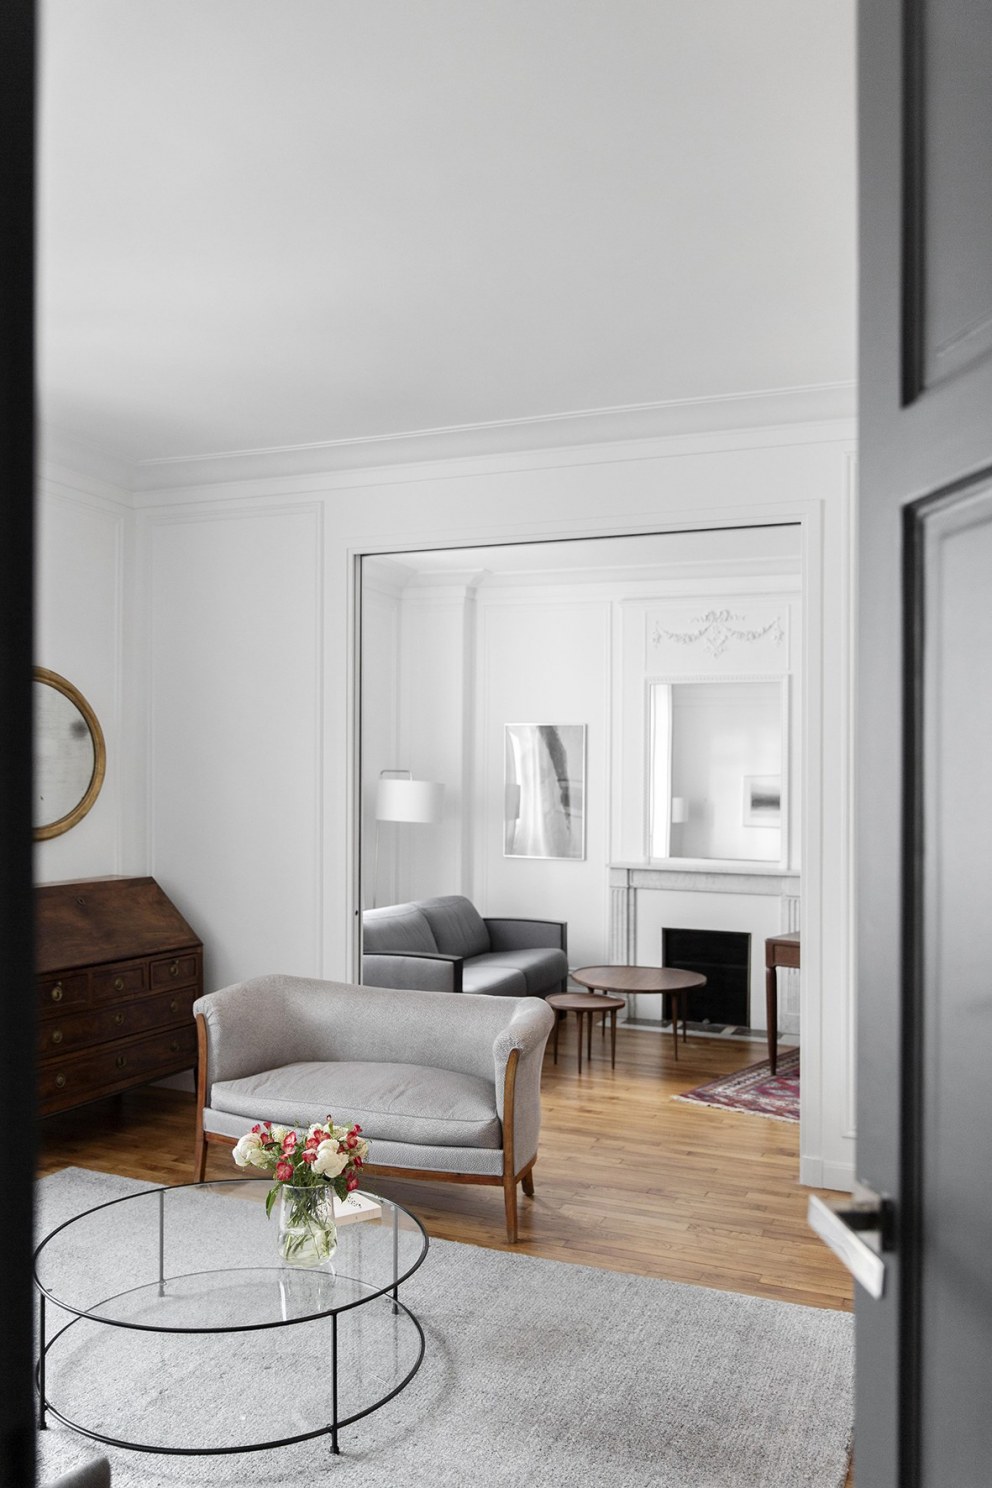 AN ELEGANT PIED-A-TERRE | PIED-A-TERRE 14 | Interior Designers